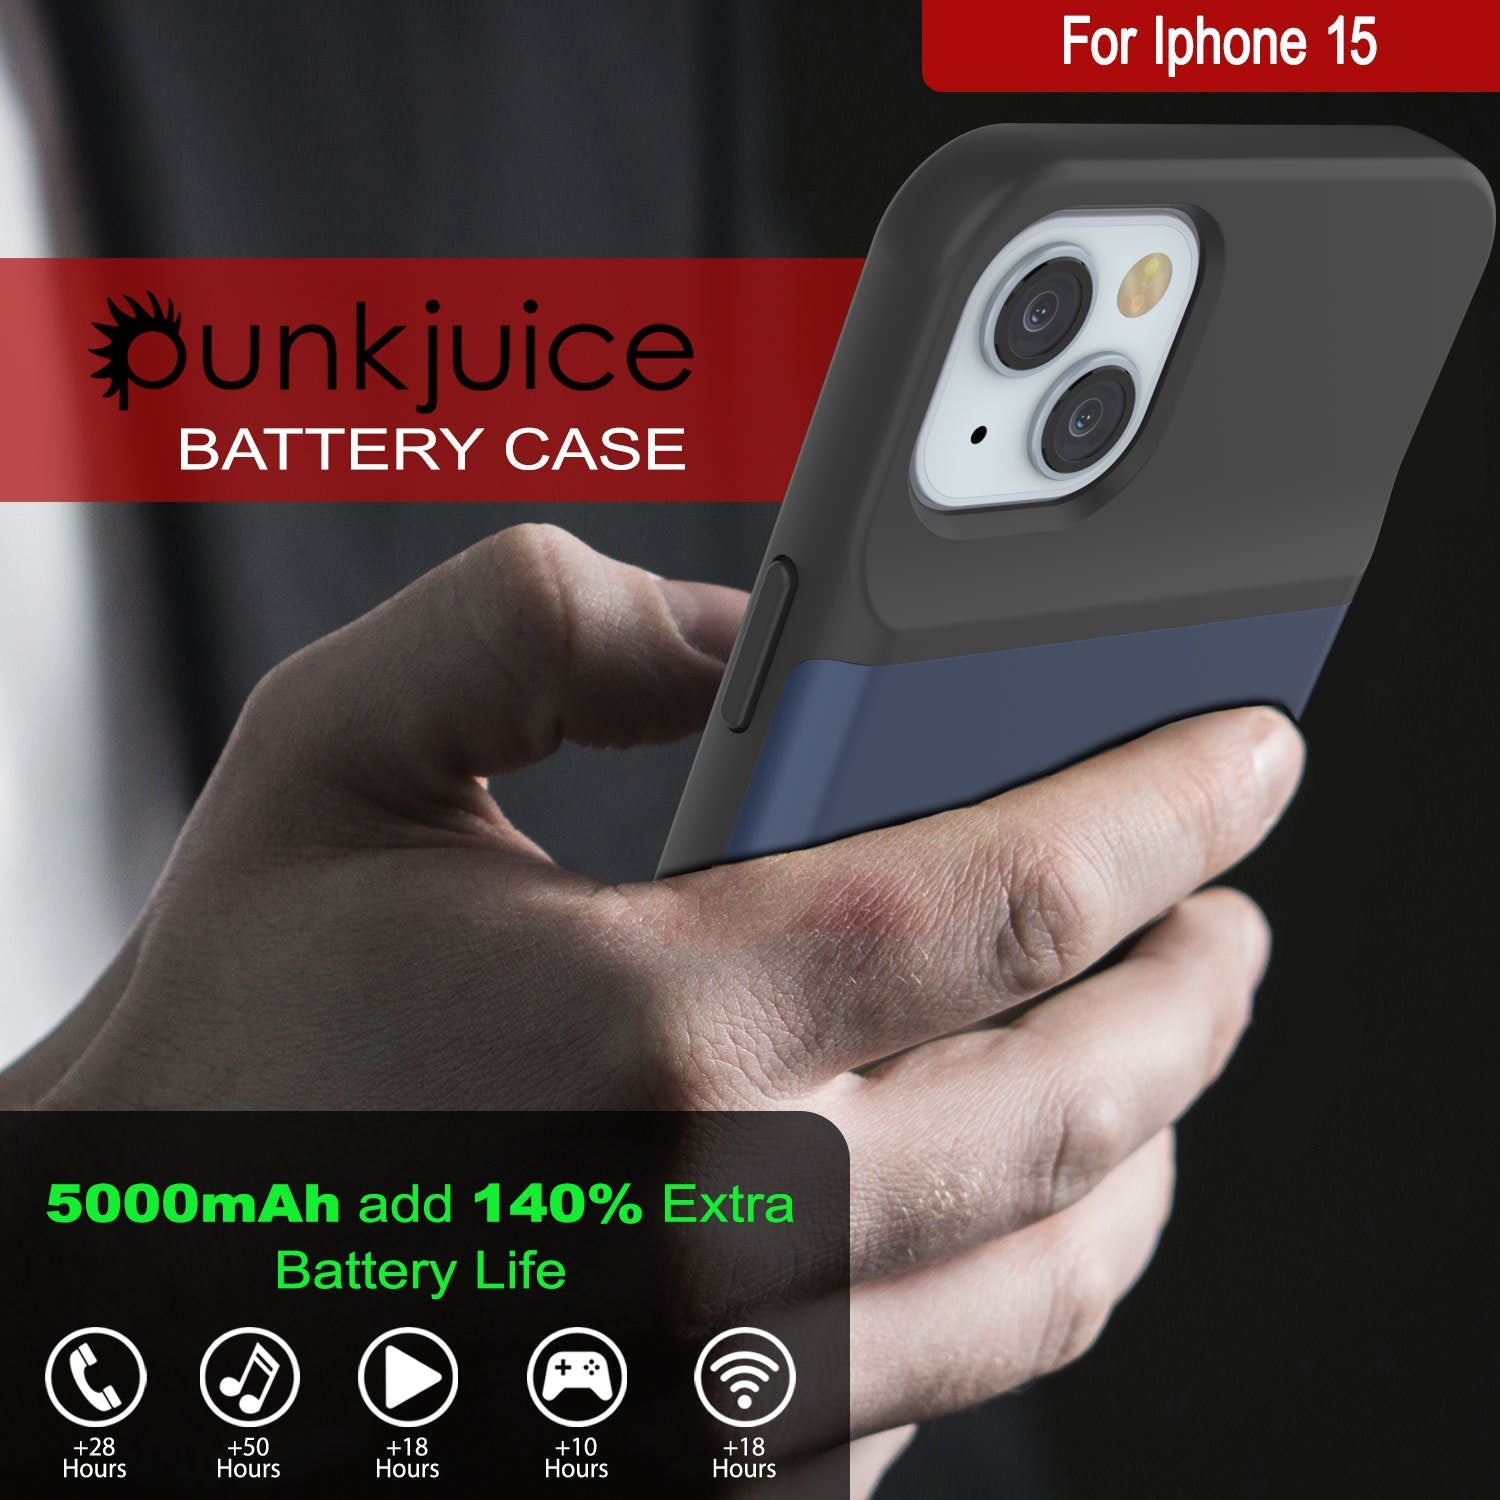 iPhone 15 Battery Case, PunkJuice 5000mAH Fast Charging Power Bank W/ Screen Protector | [Navy Blue]